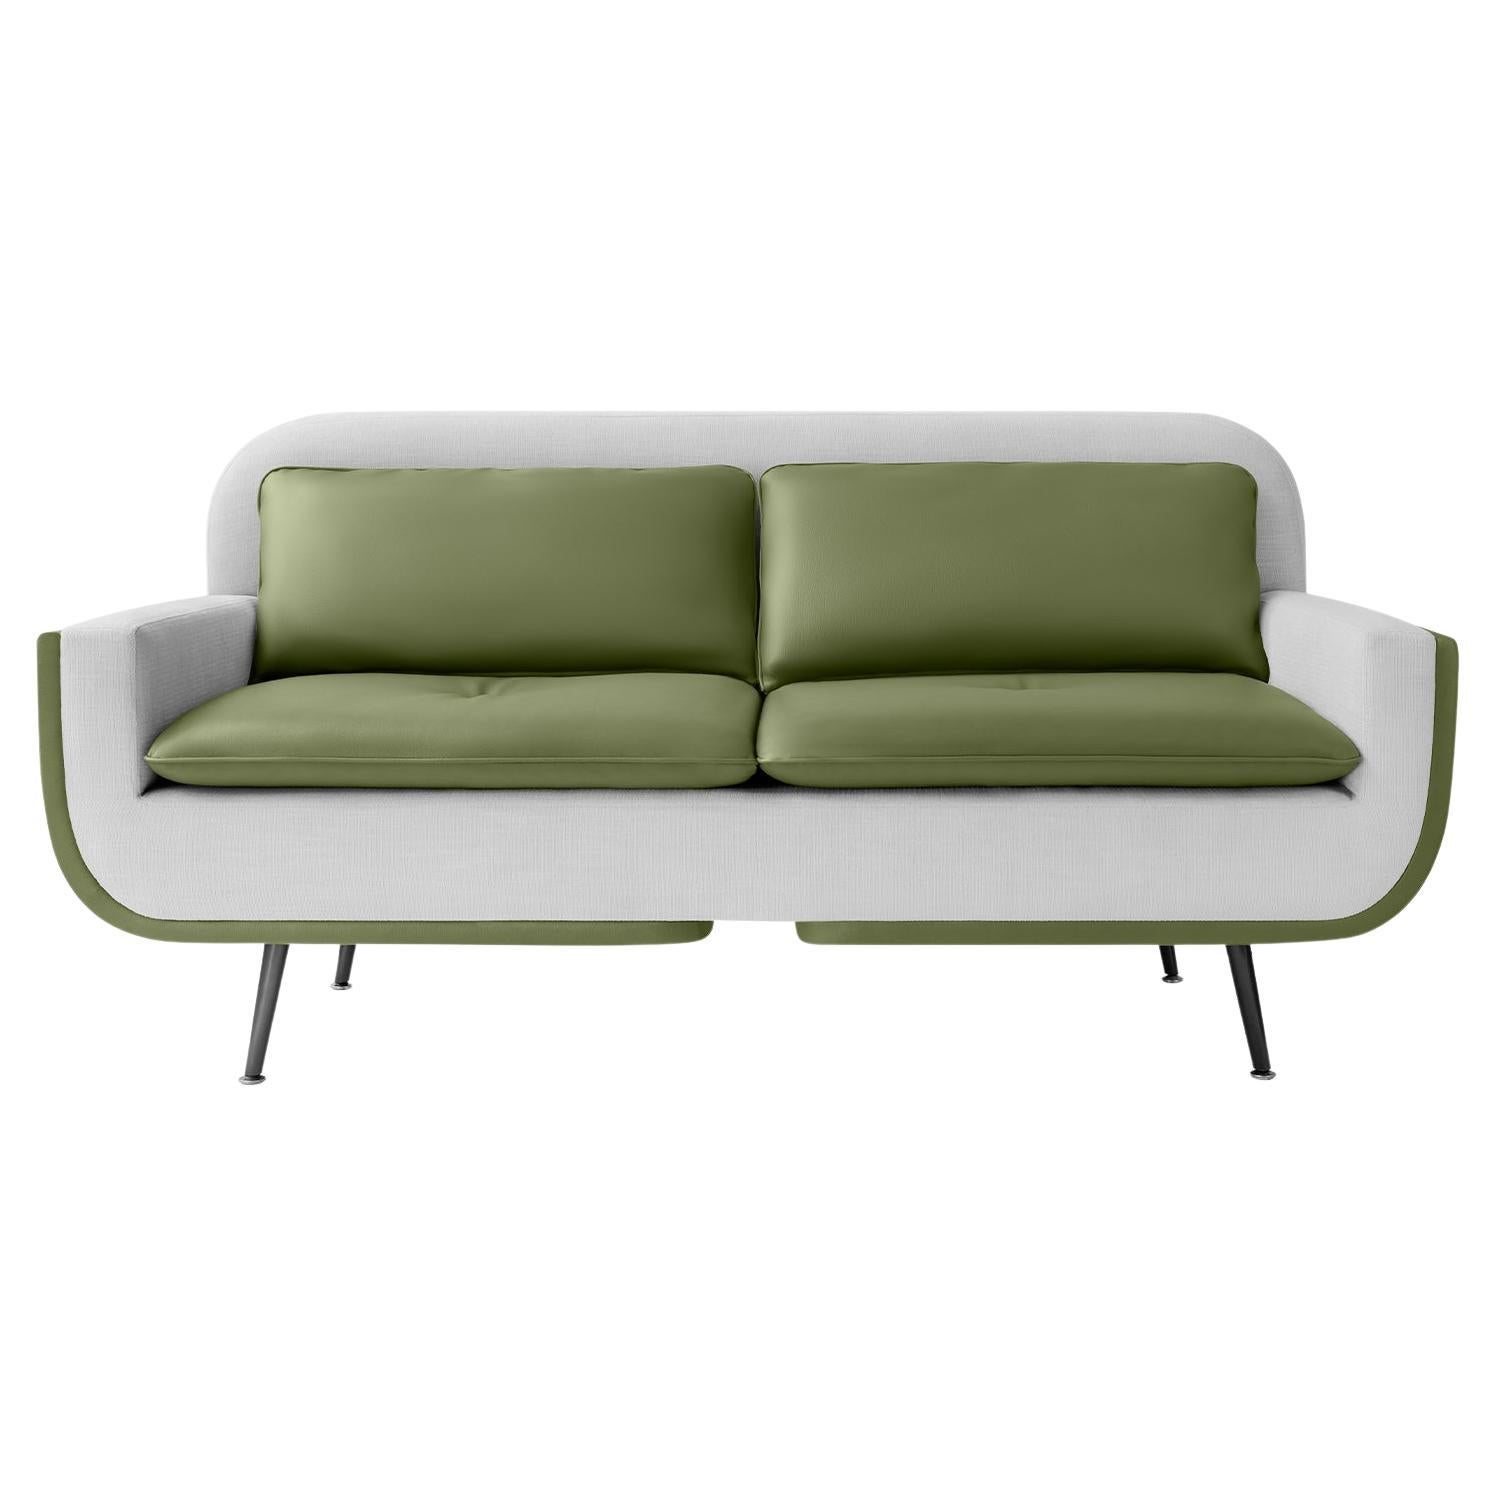 Up Green Two Seater Sofa For Sale